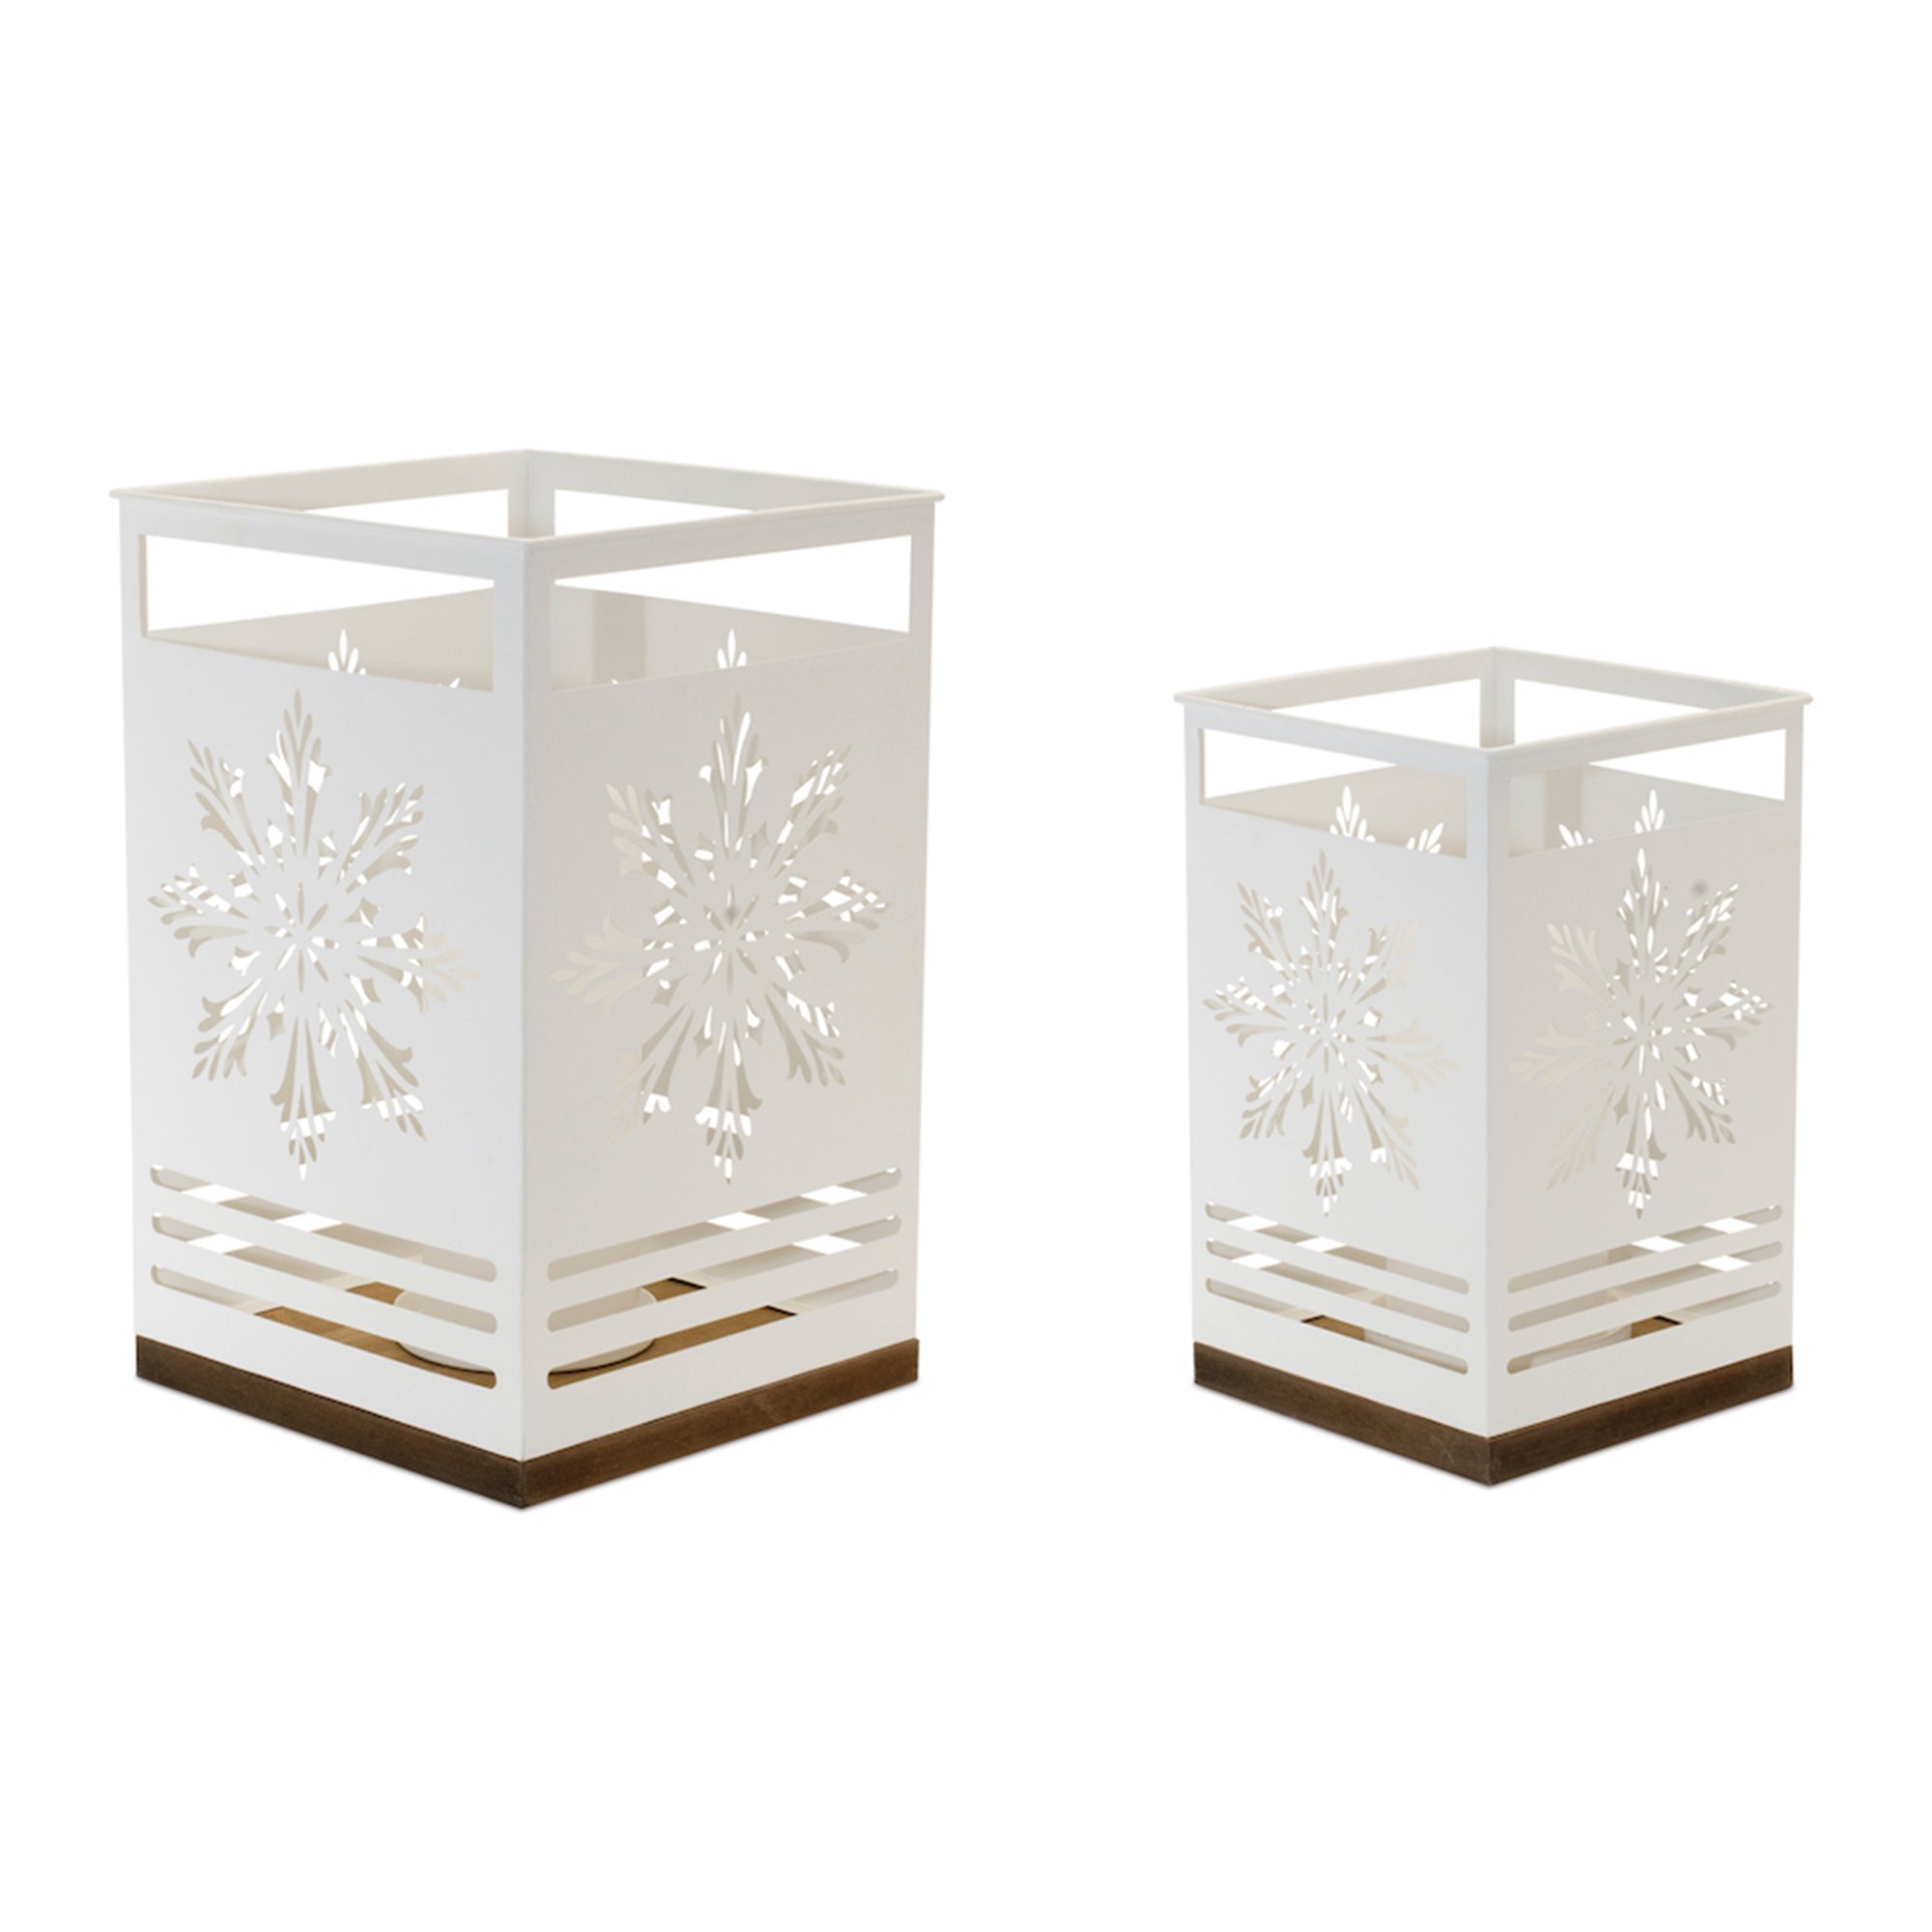 Snowflake Cut-Out Metal Candle Holder 12"H